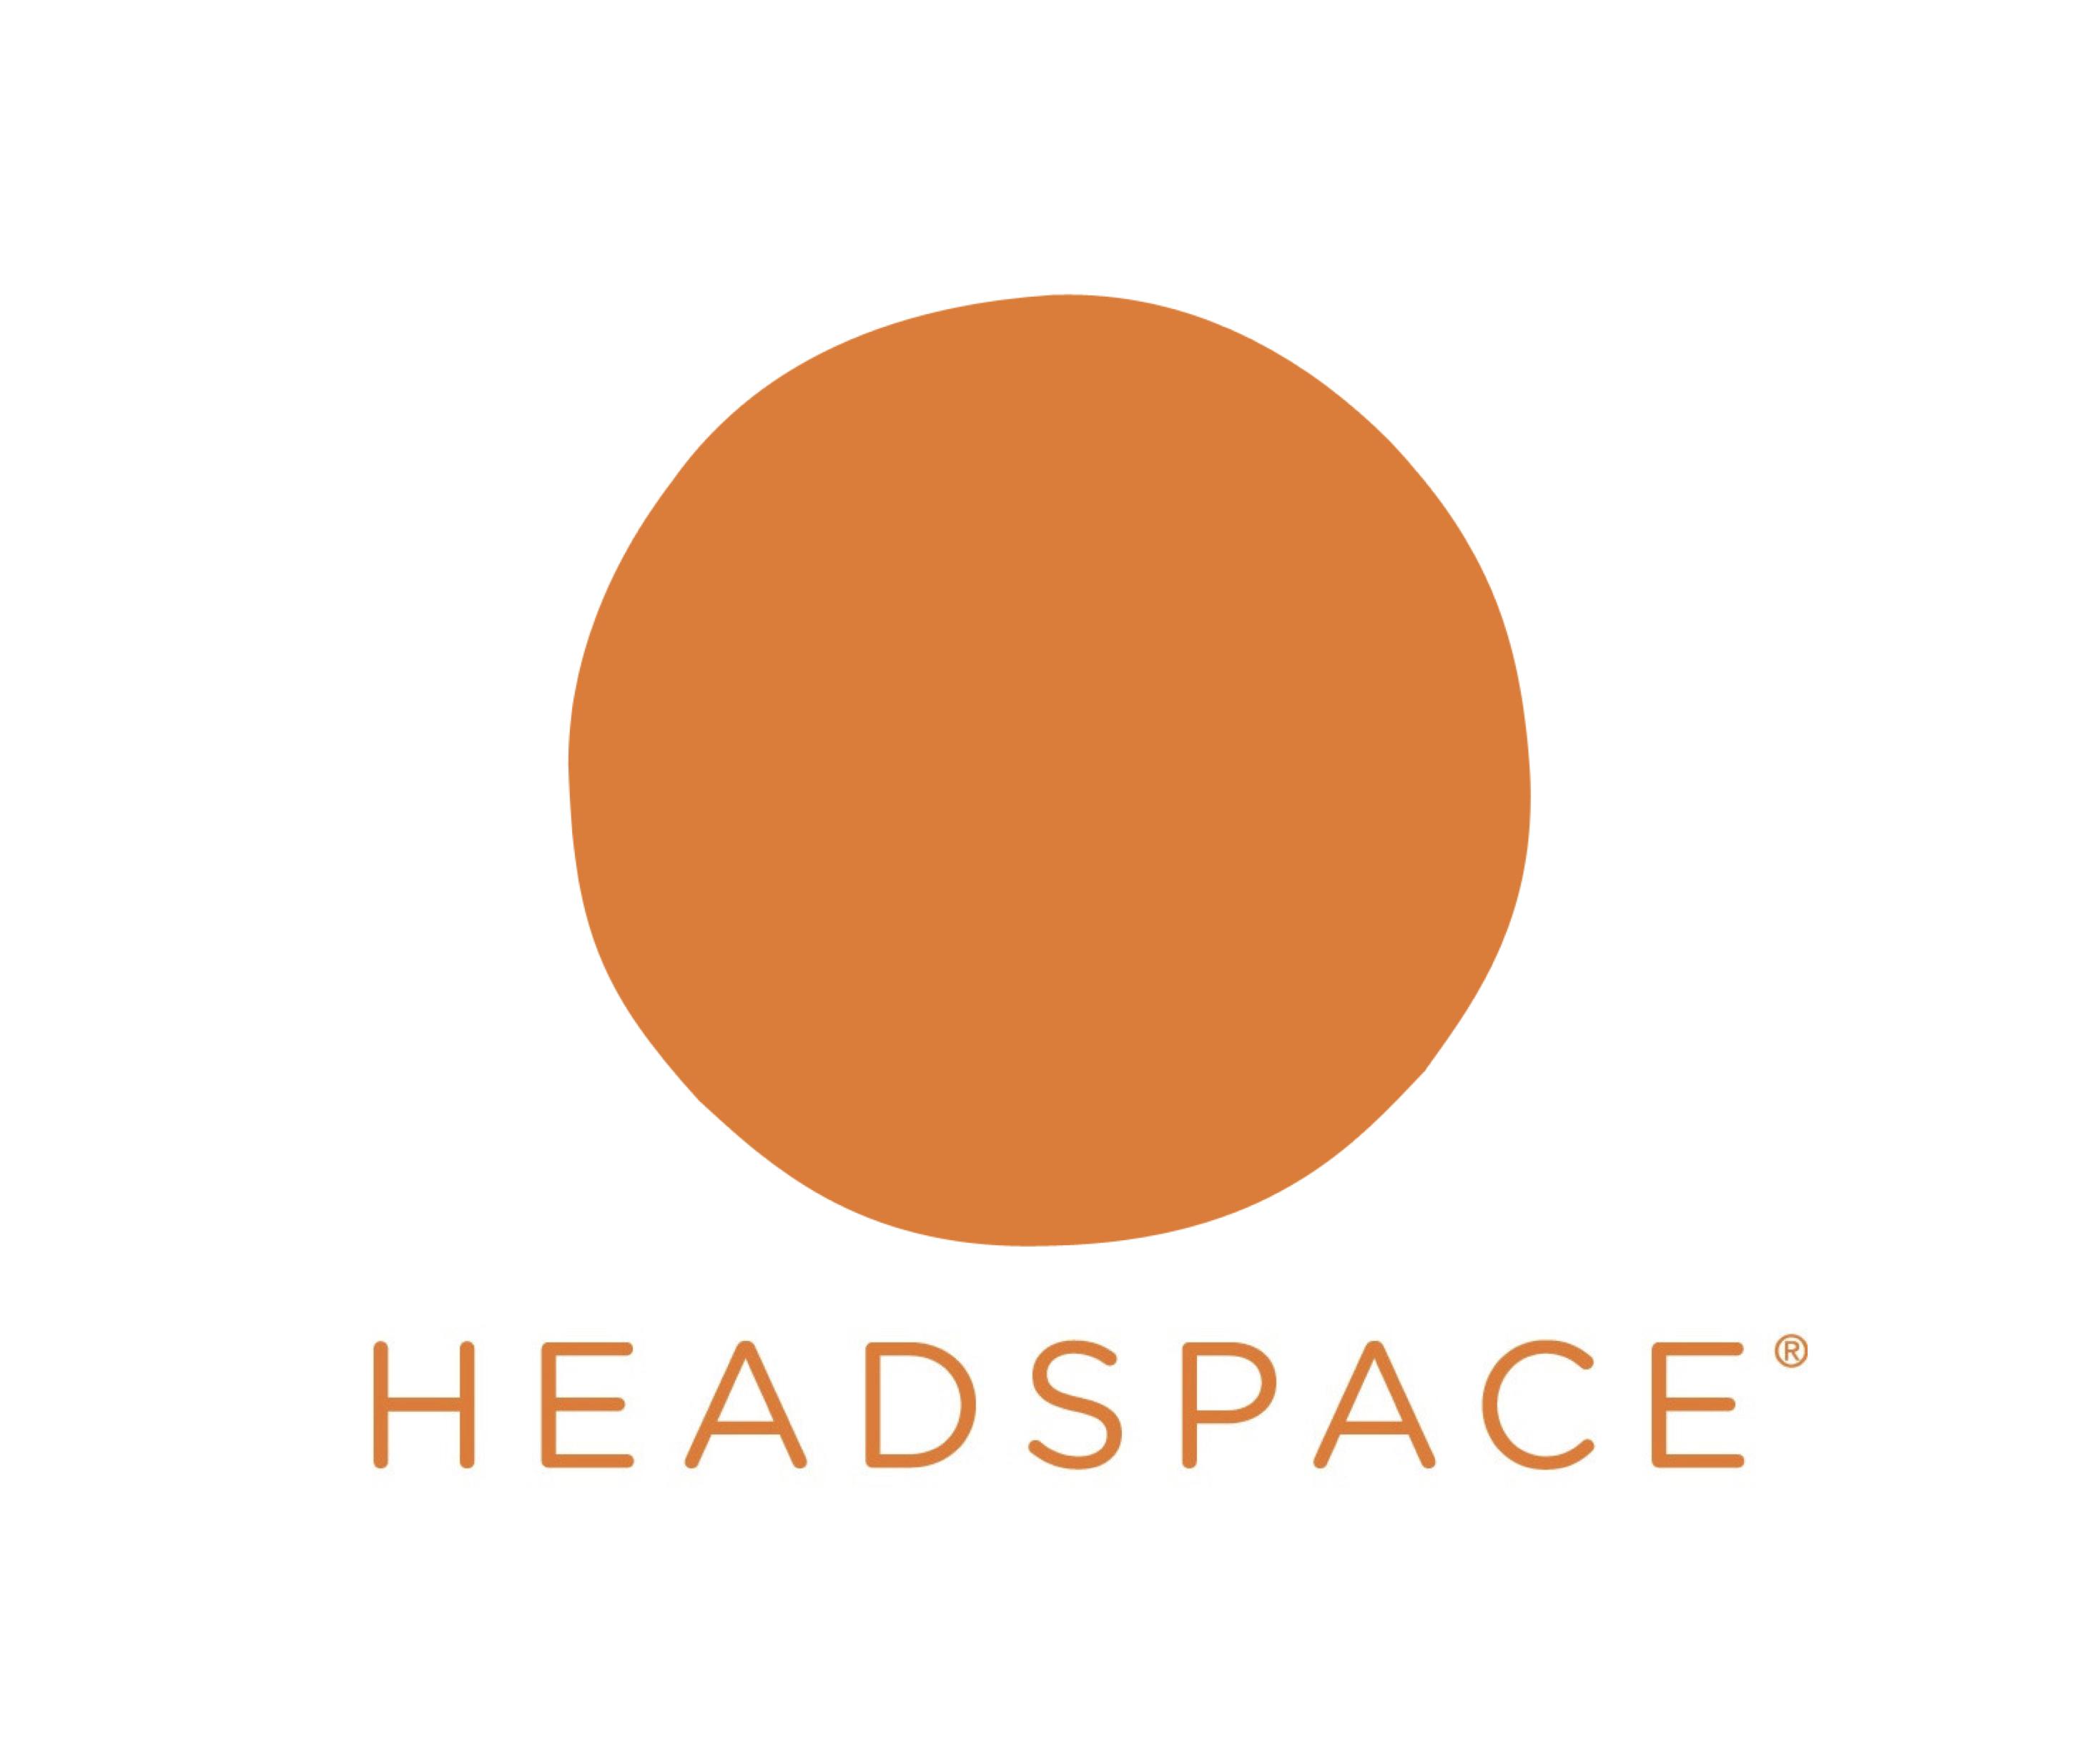 Clear App Logo - Use the Headspace app to clear your mind - The Tampa Bay 100